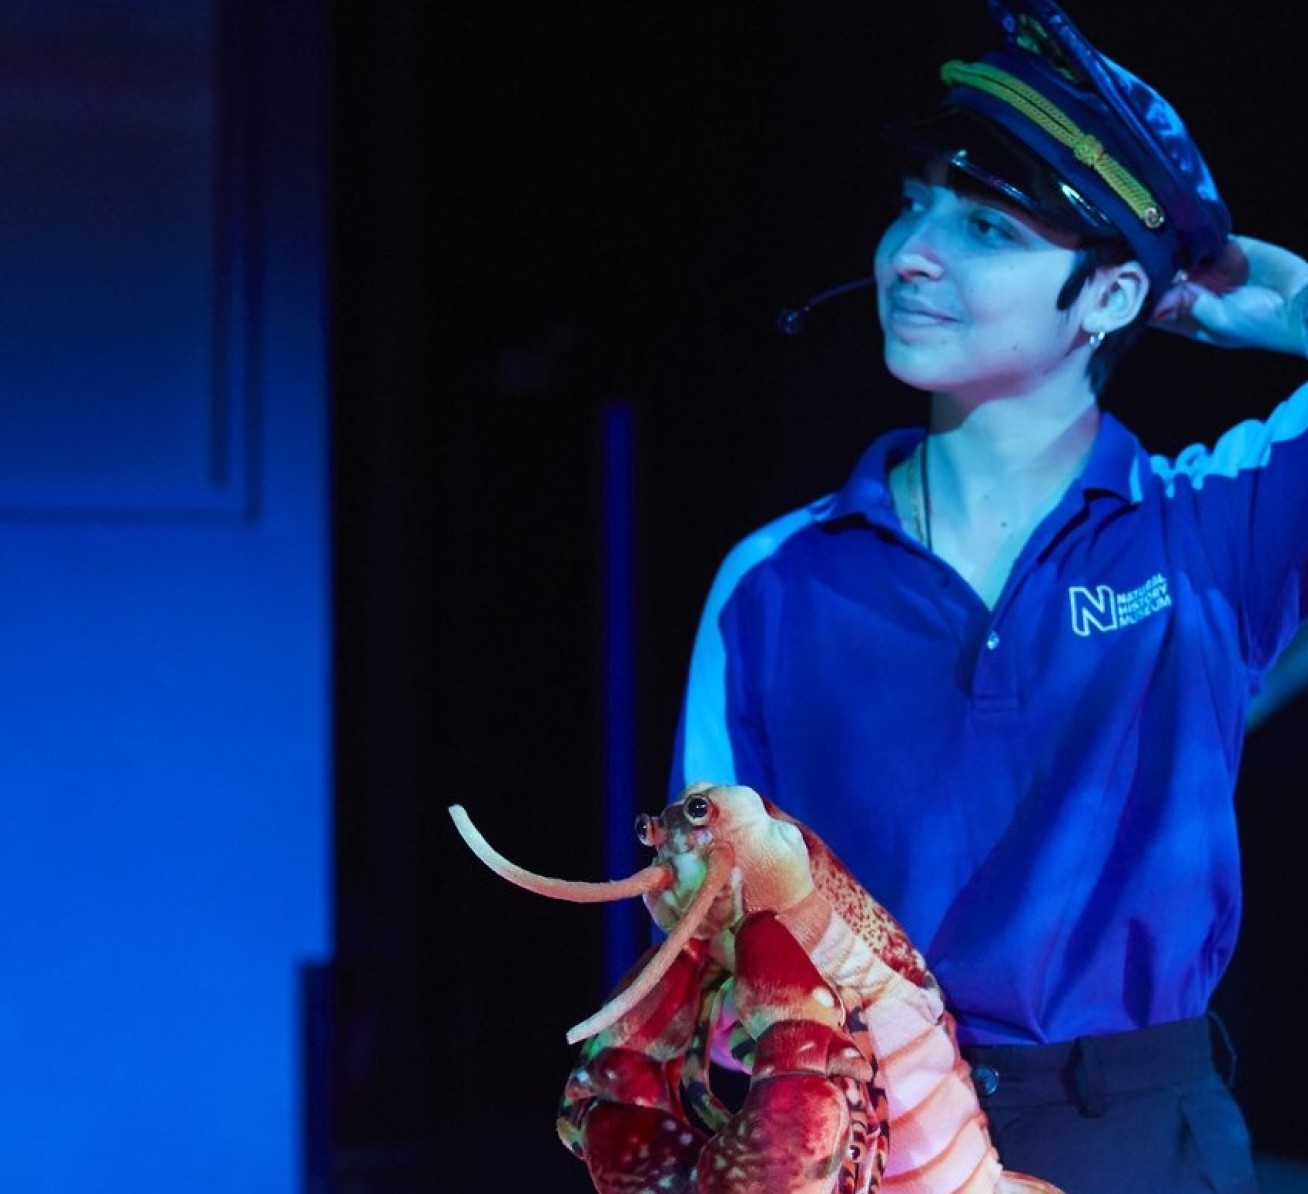 A woman with a tour guide hat holding a lobster stuffed toy